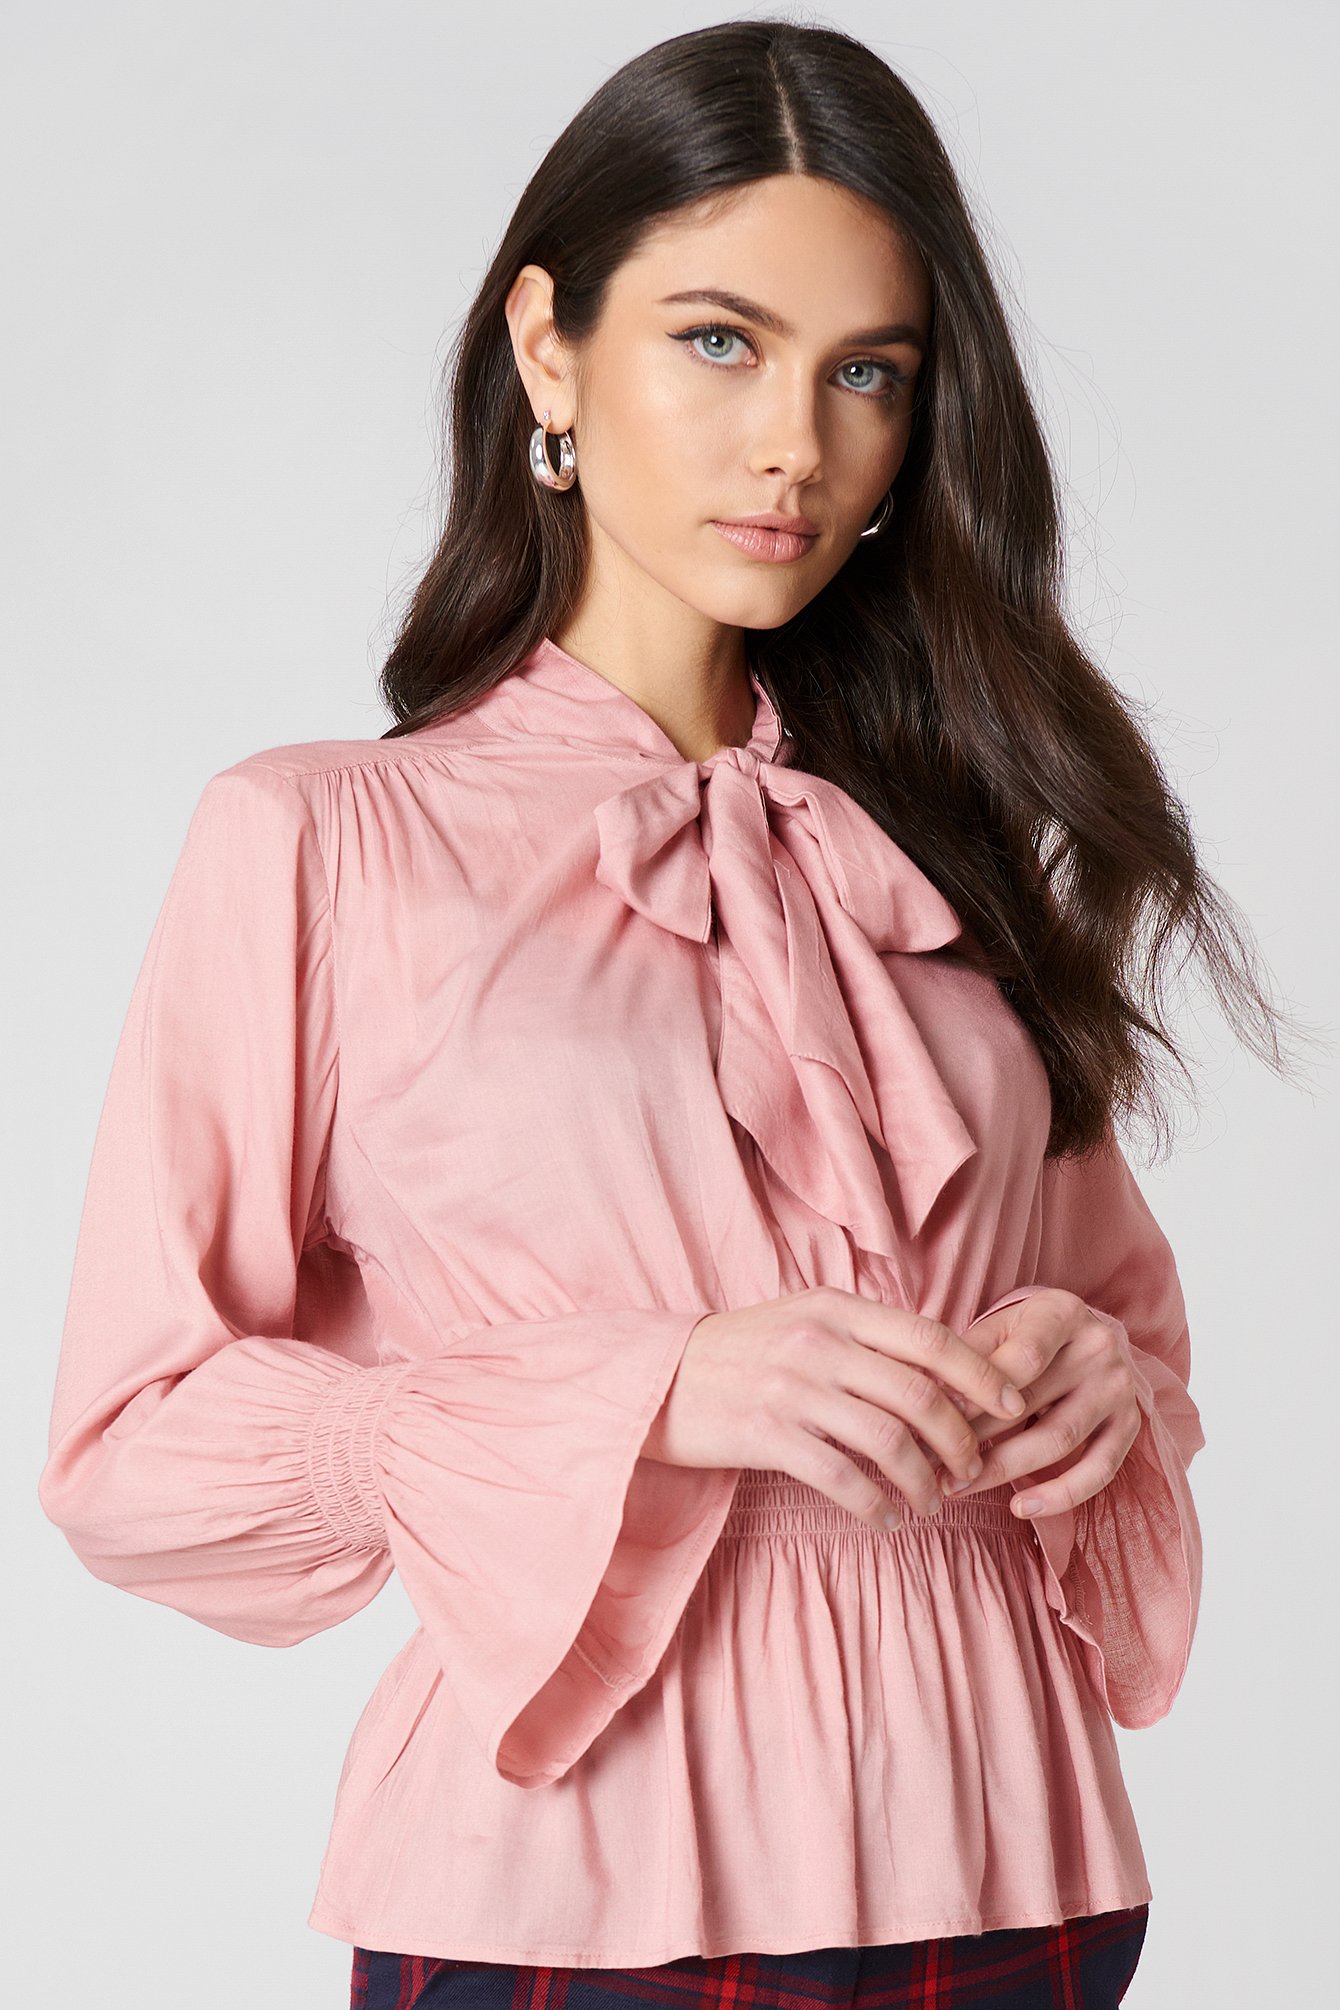 Shirred Detail Tie  Neck Blouse  Dusty Pink na kd com